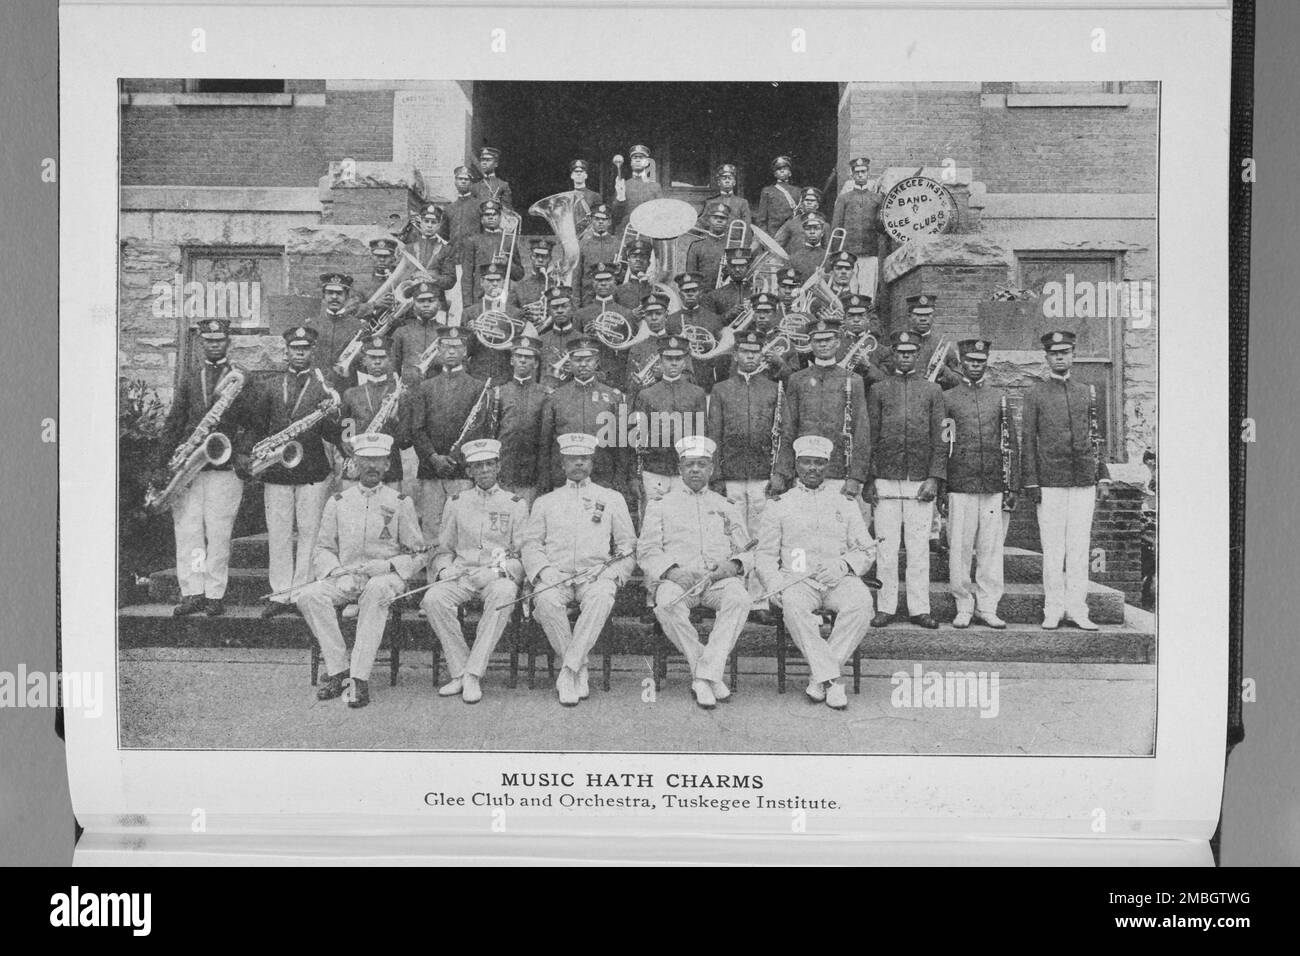 Musik hat Charme; Glee Club und Orchester, Tuskegee Institute, 1917. Stockfoto